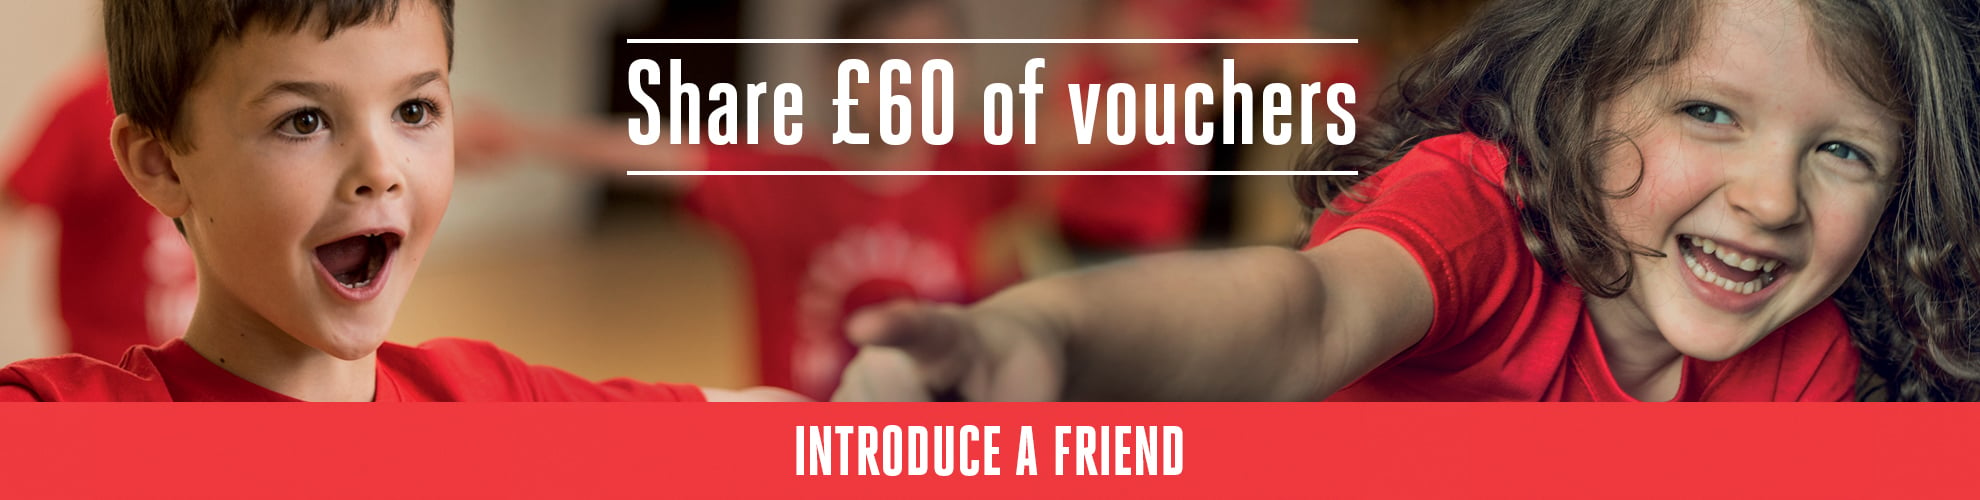 Introduce a friend and you each get £50 worth of vouchers!